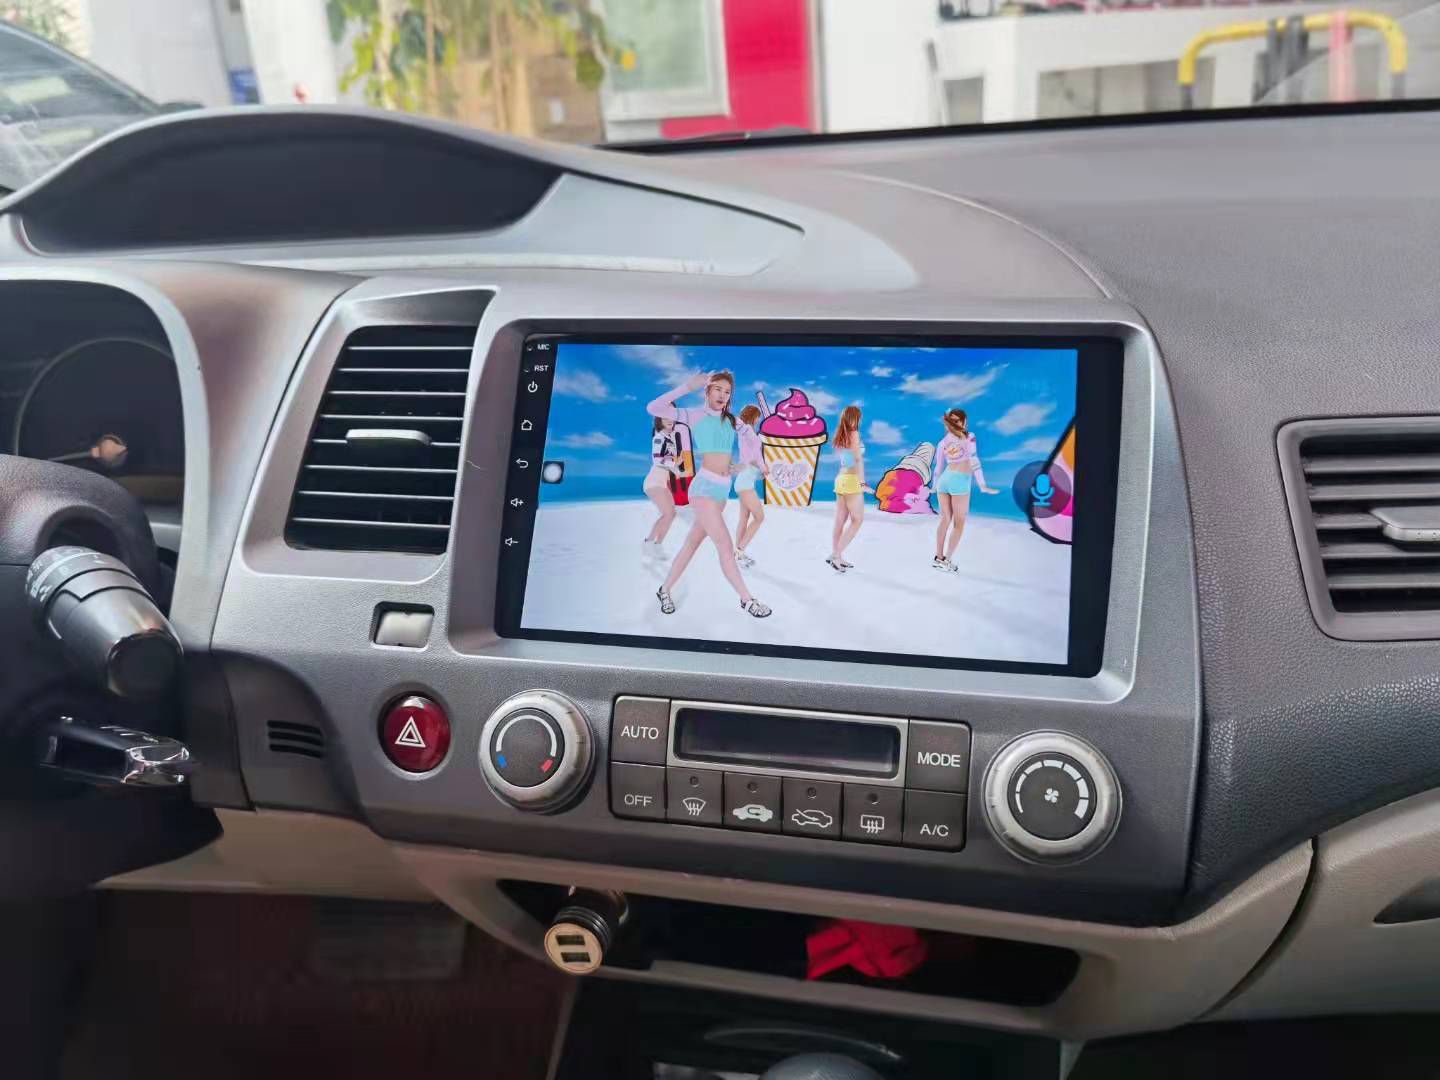 Honda Civic hybride 2007-2011 10.1 inch navigatie carkit android 13 apple carplay android auto